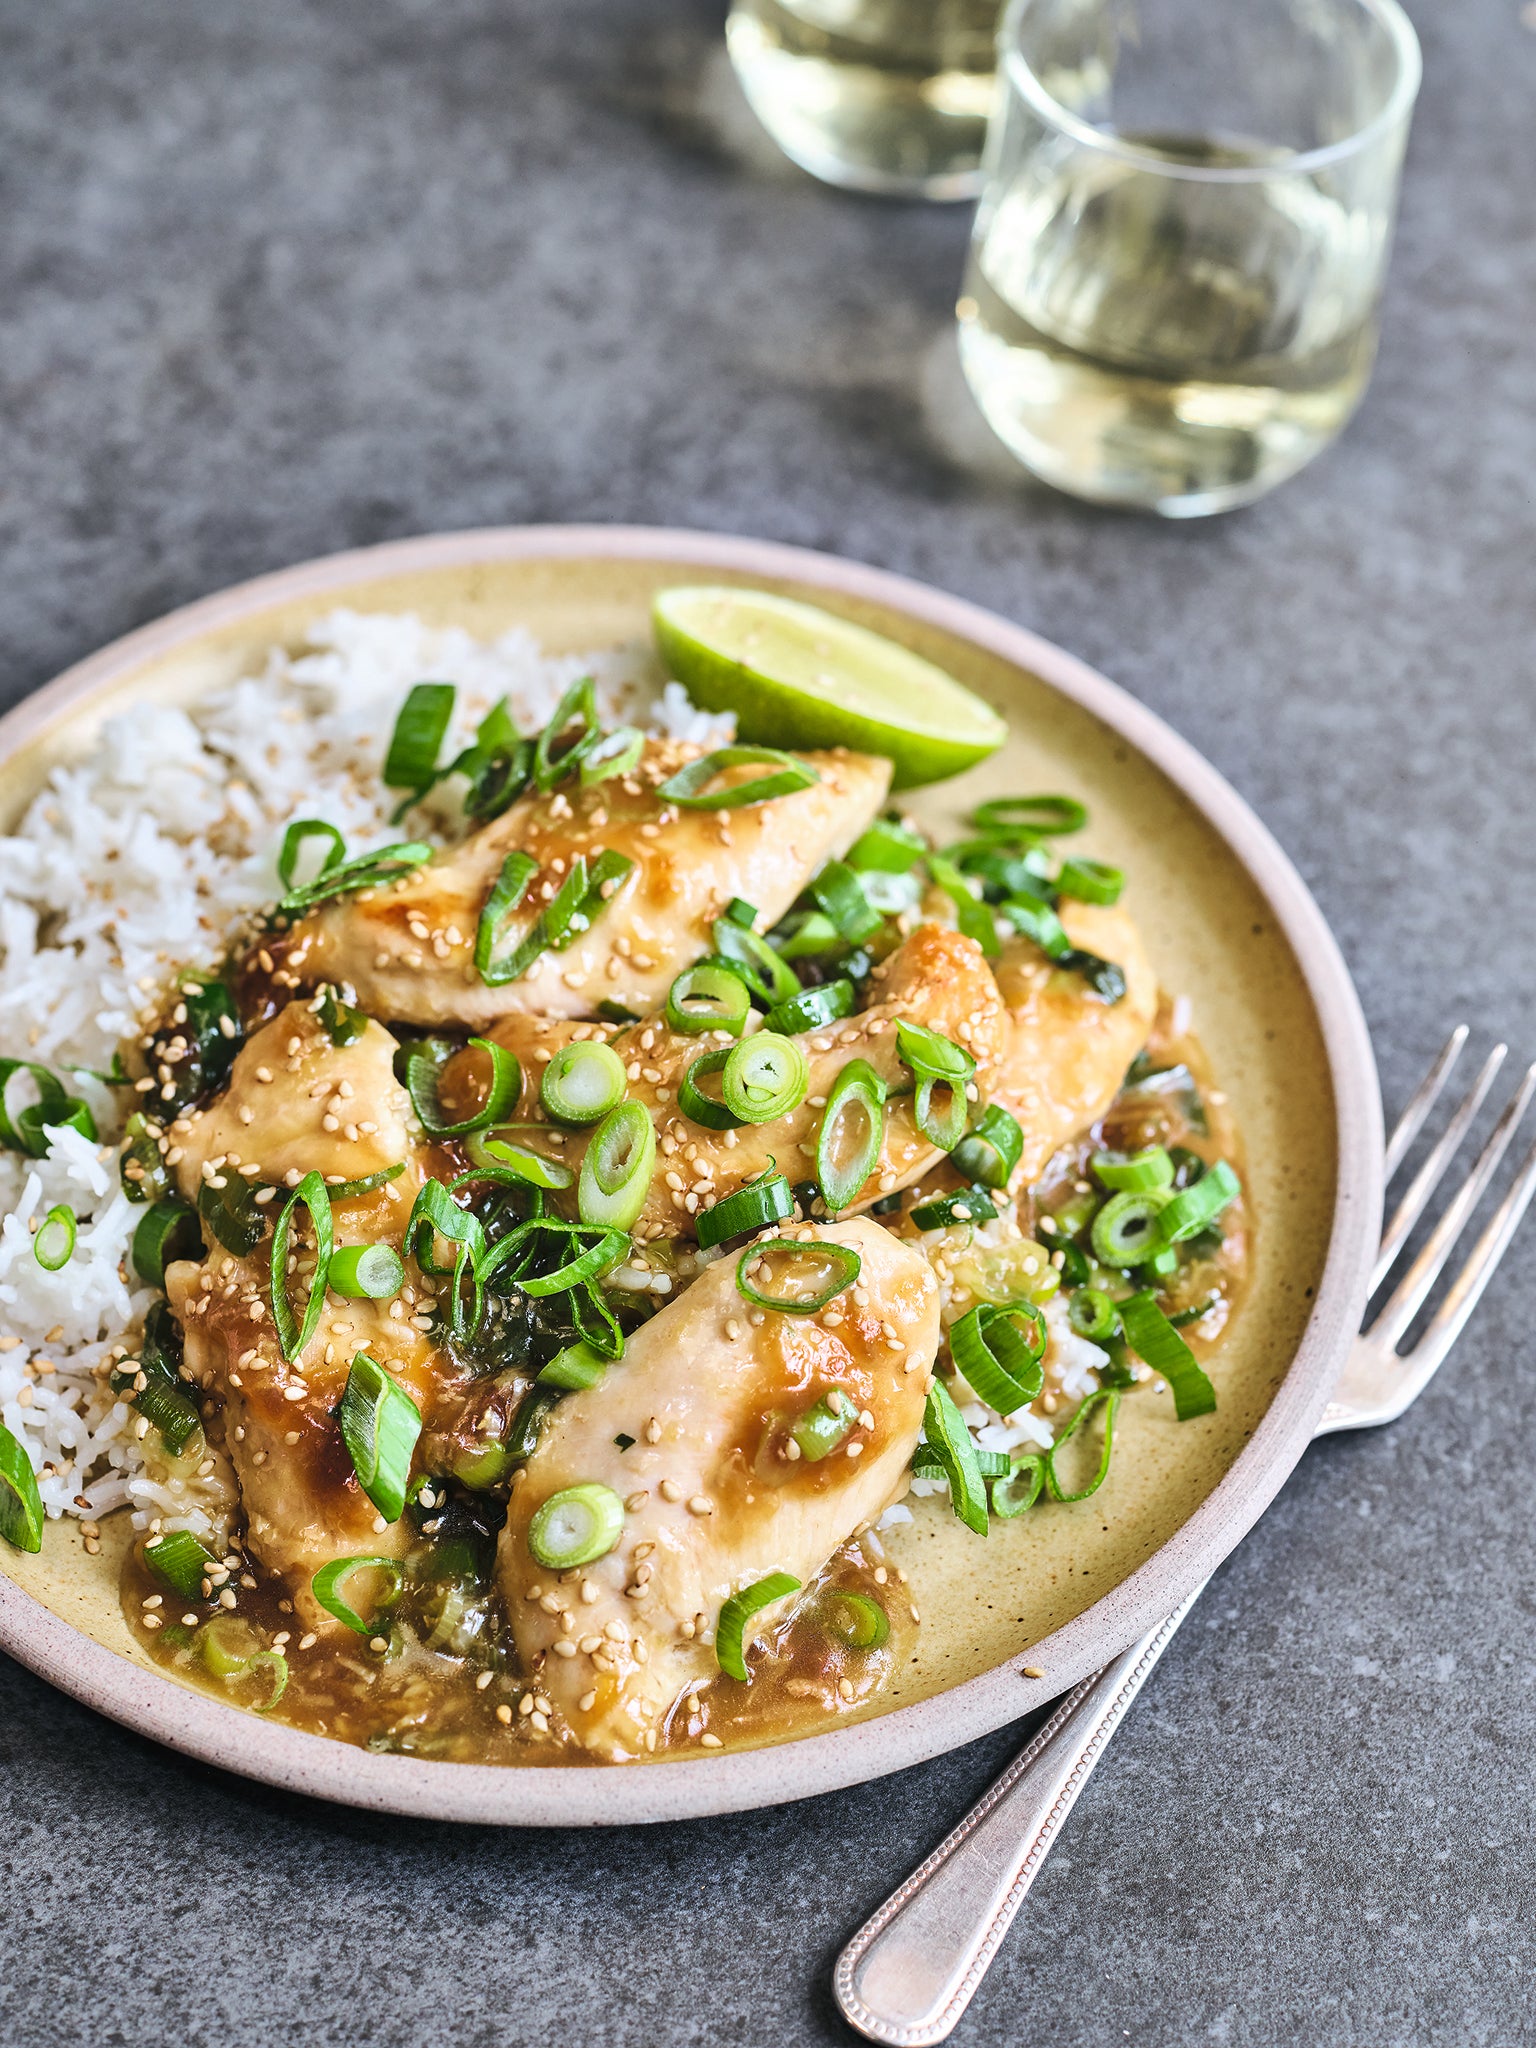 Saucy spring onion chicken is Wicks’ favourite recipe in the book